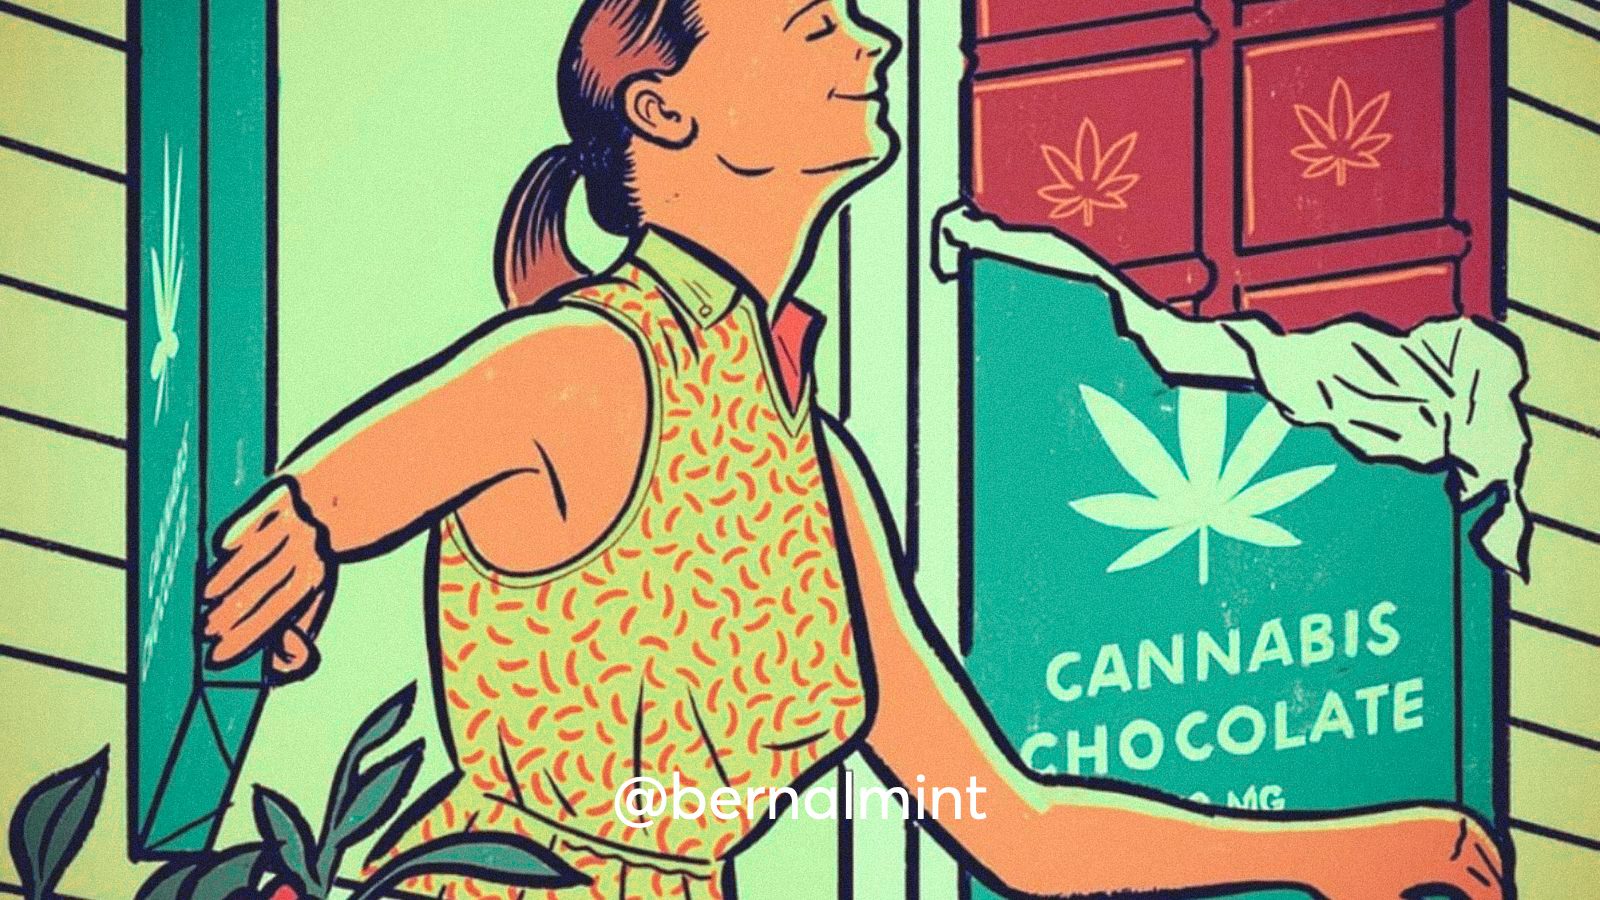 An illustration of a woman opening her shutters, which happen to be made out of cannabis chocolate.